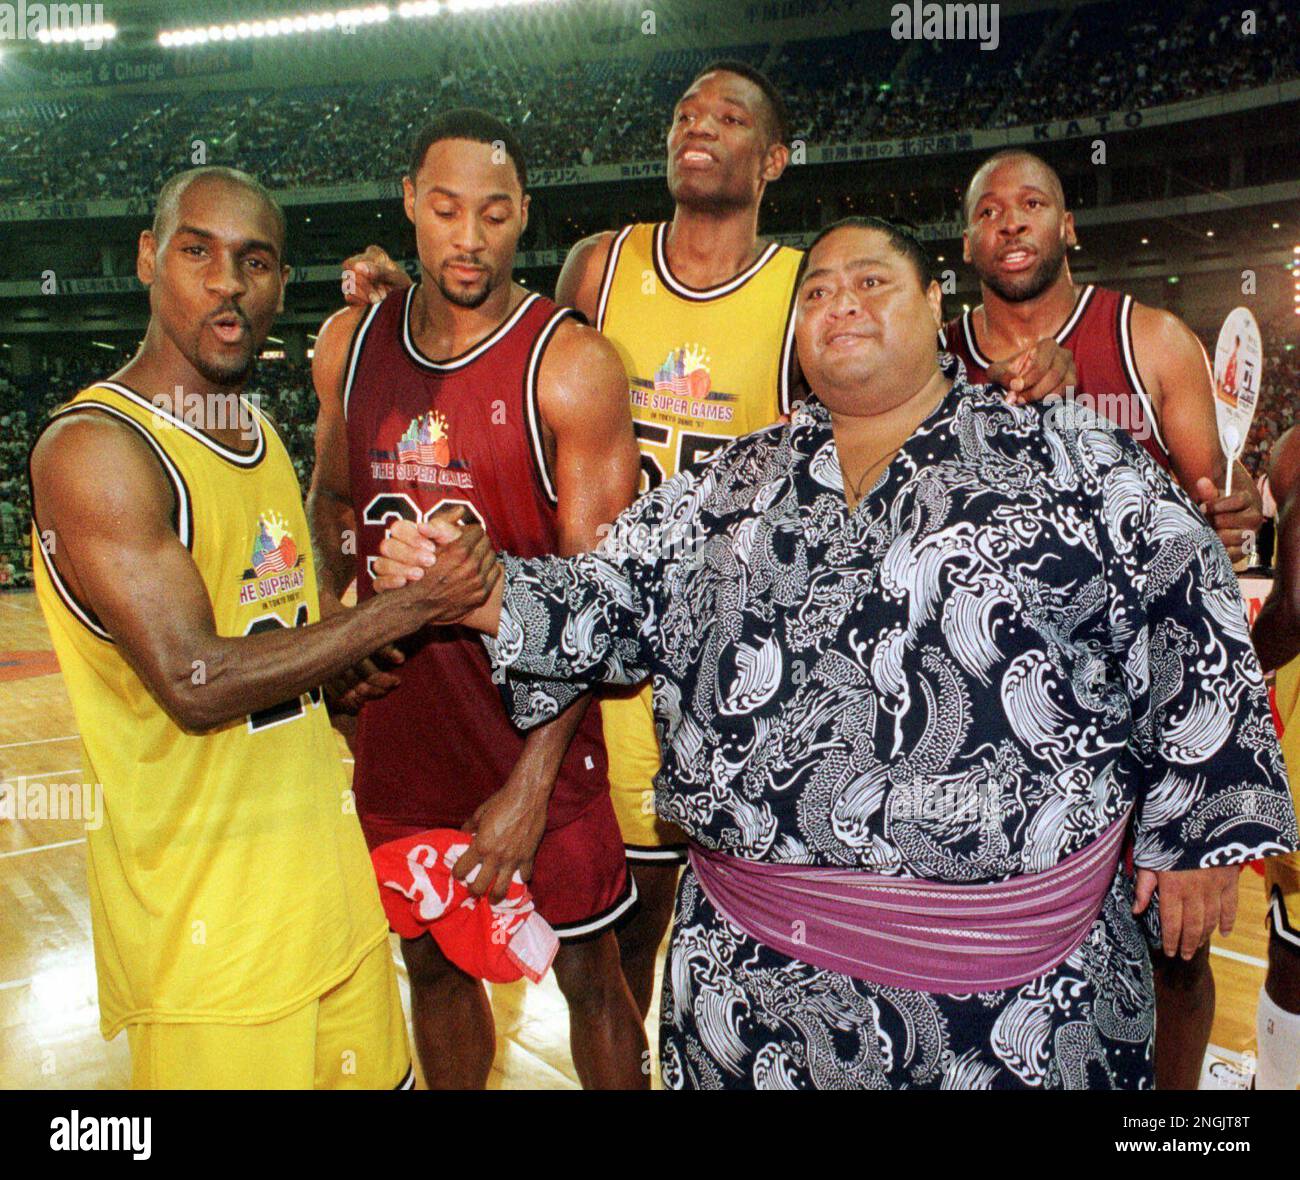 Shaquille O'Neal and Gary Payton of the Miami Heat pose for a